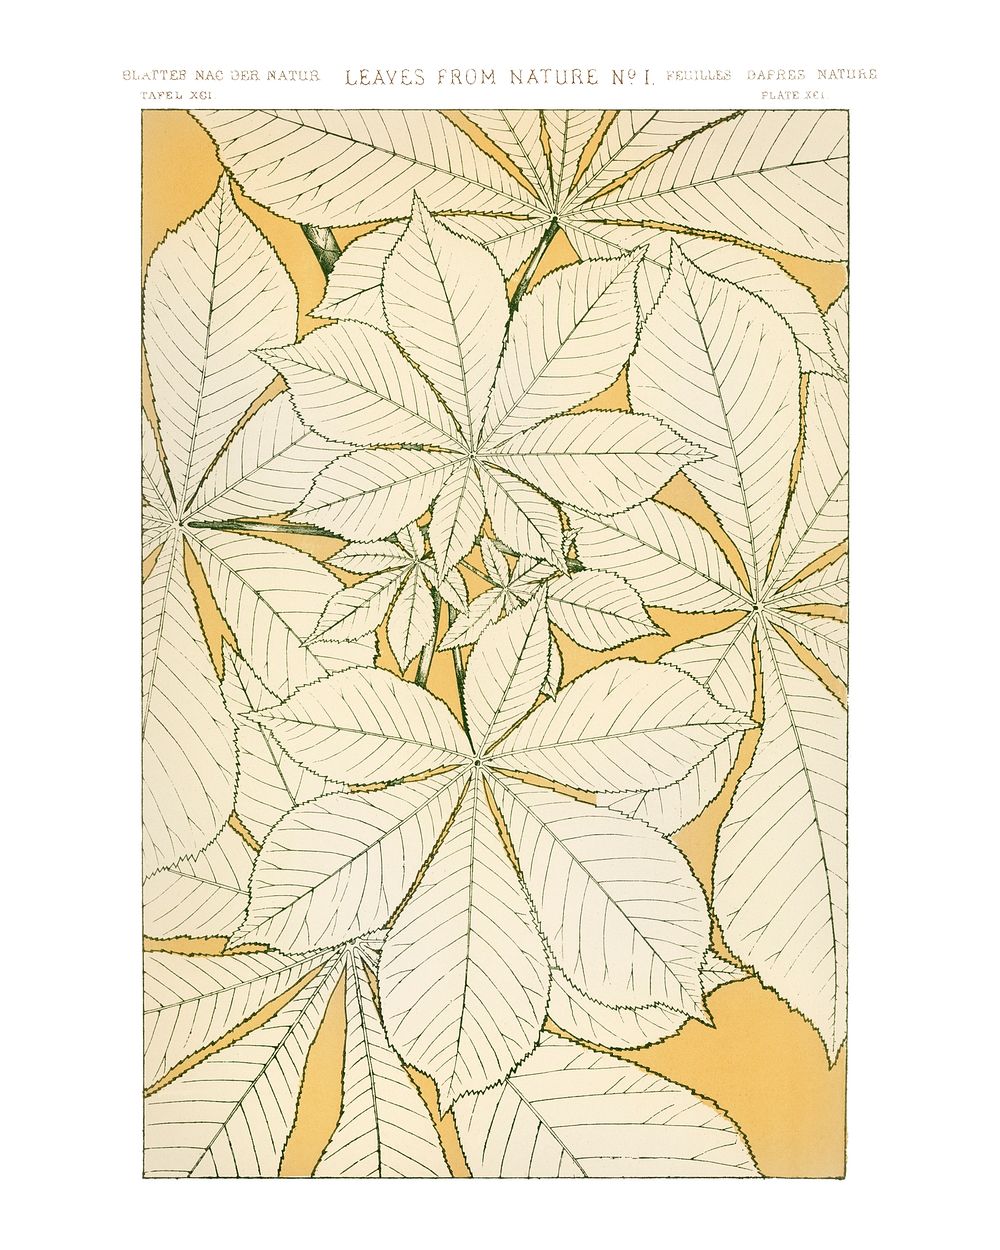 Vintage flower pattern wall art print and poster.